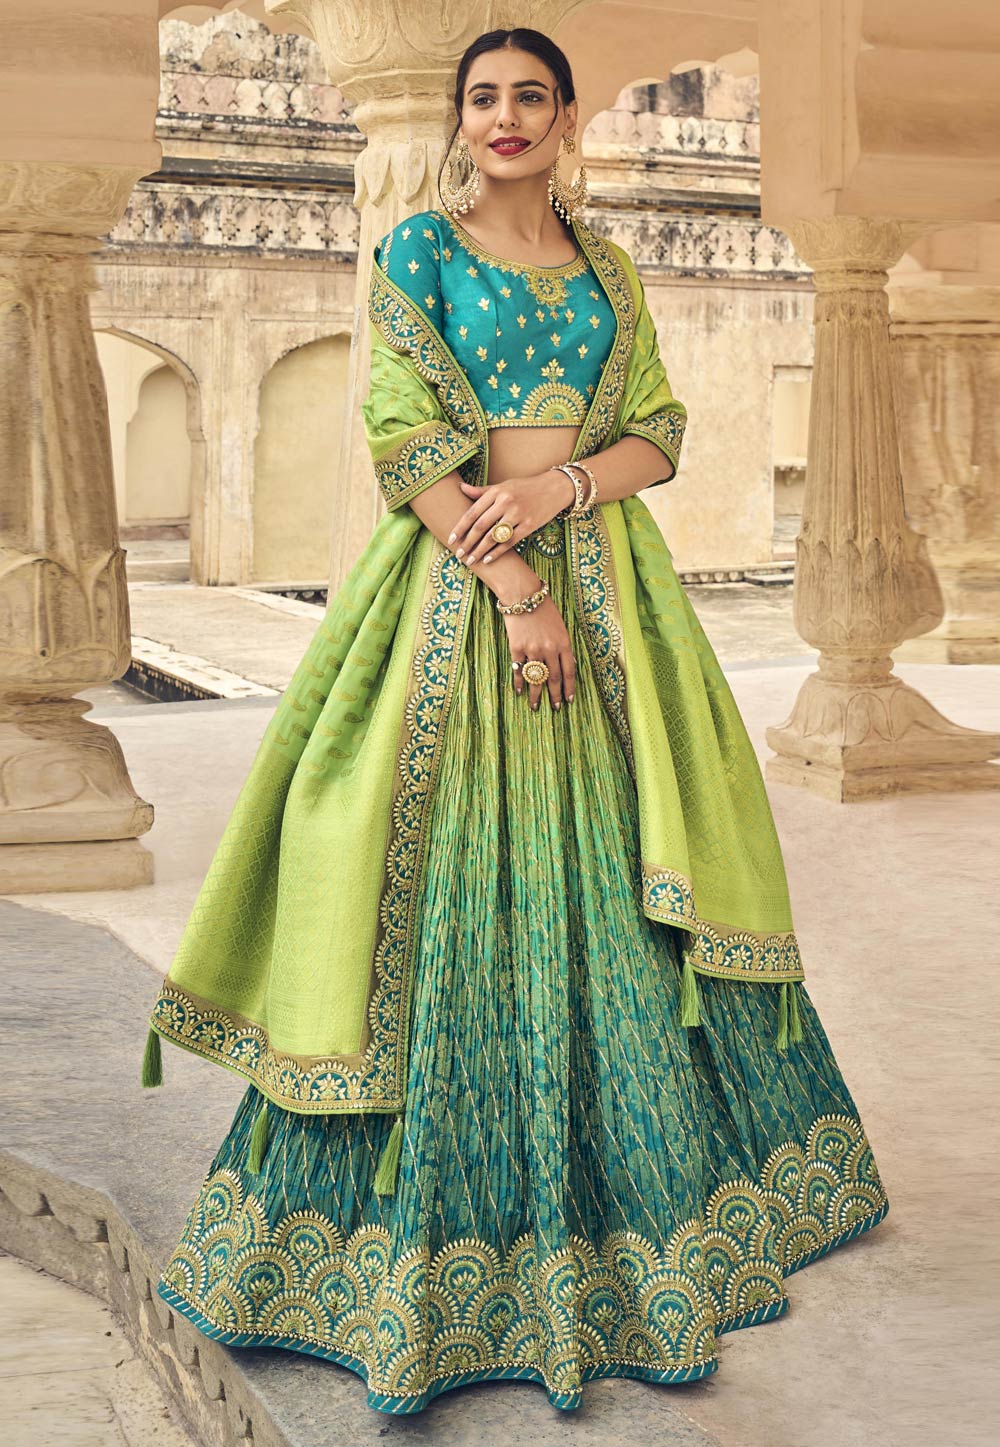 Blue and Light Green Embroidered Lehenga | Lehenga choli, Designer lehenga  choli, Green lehenga